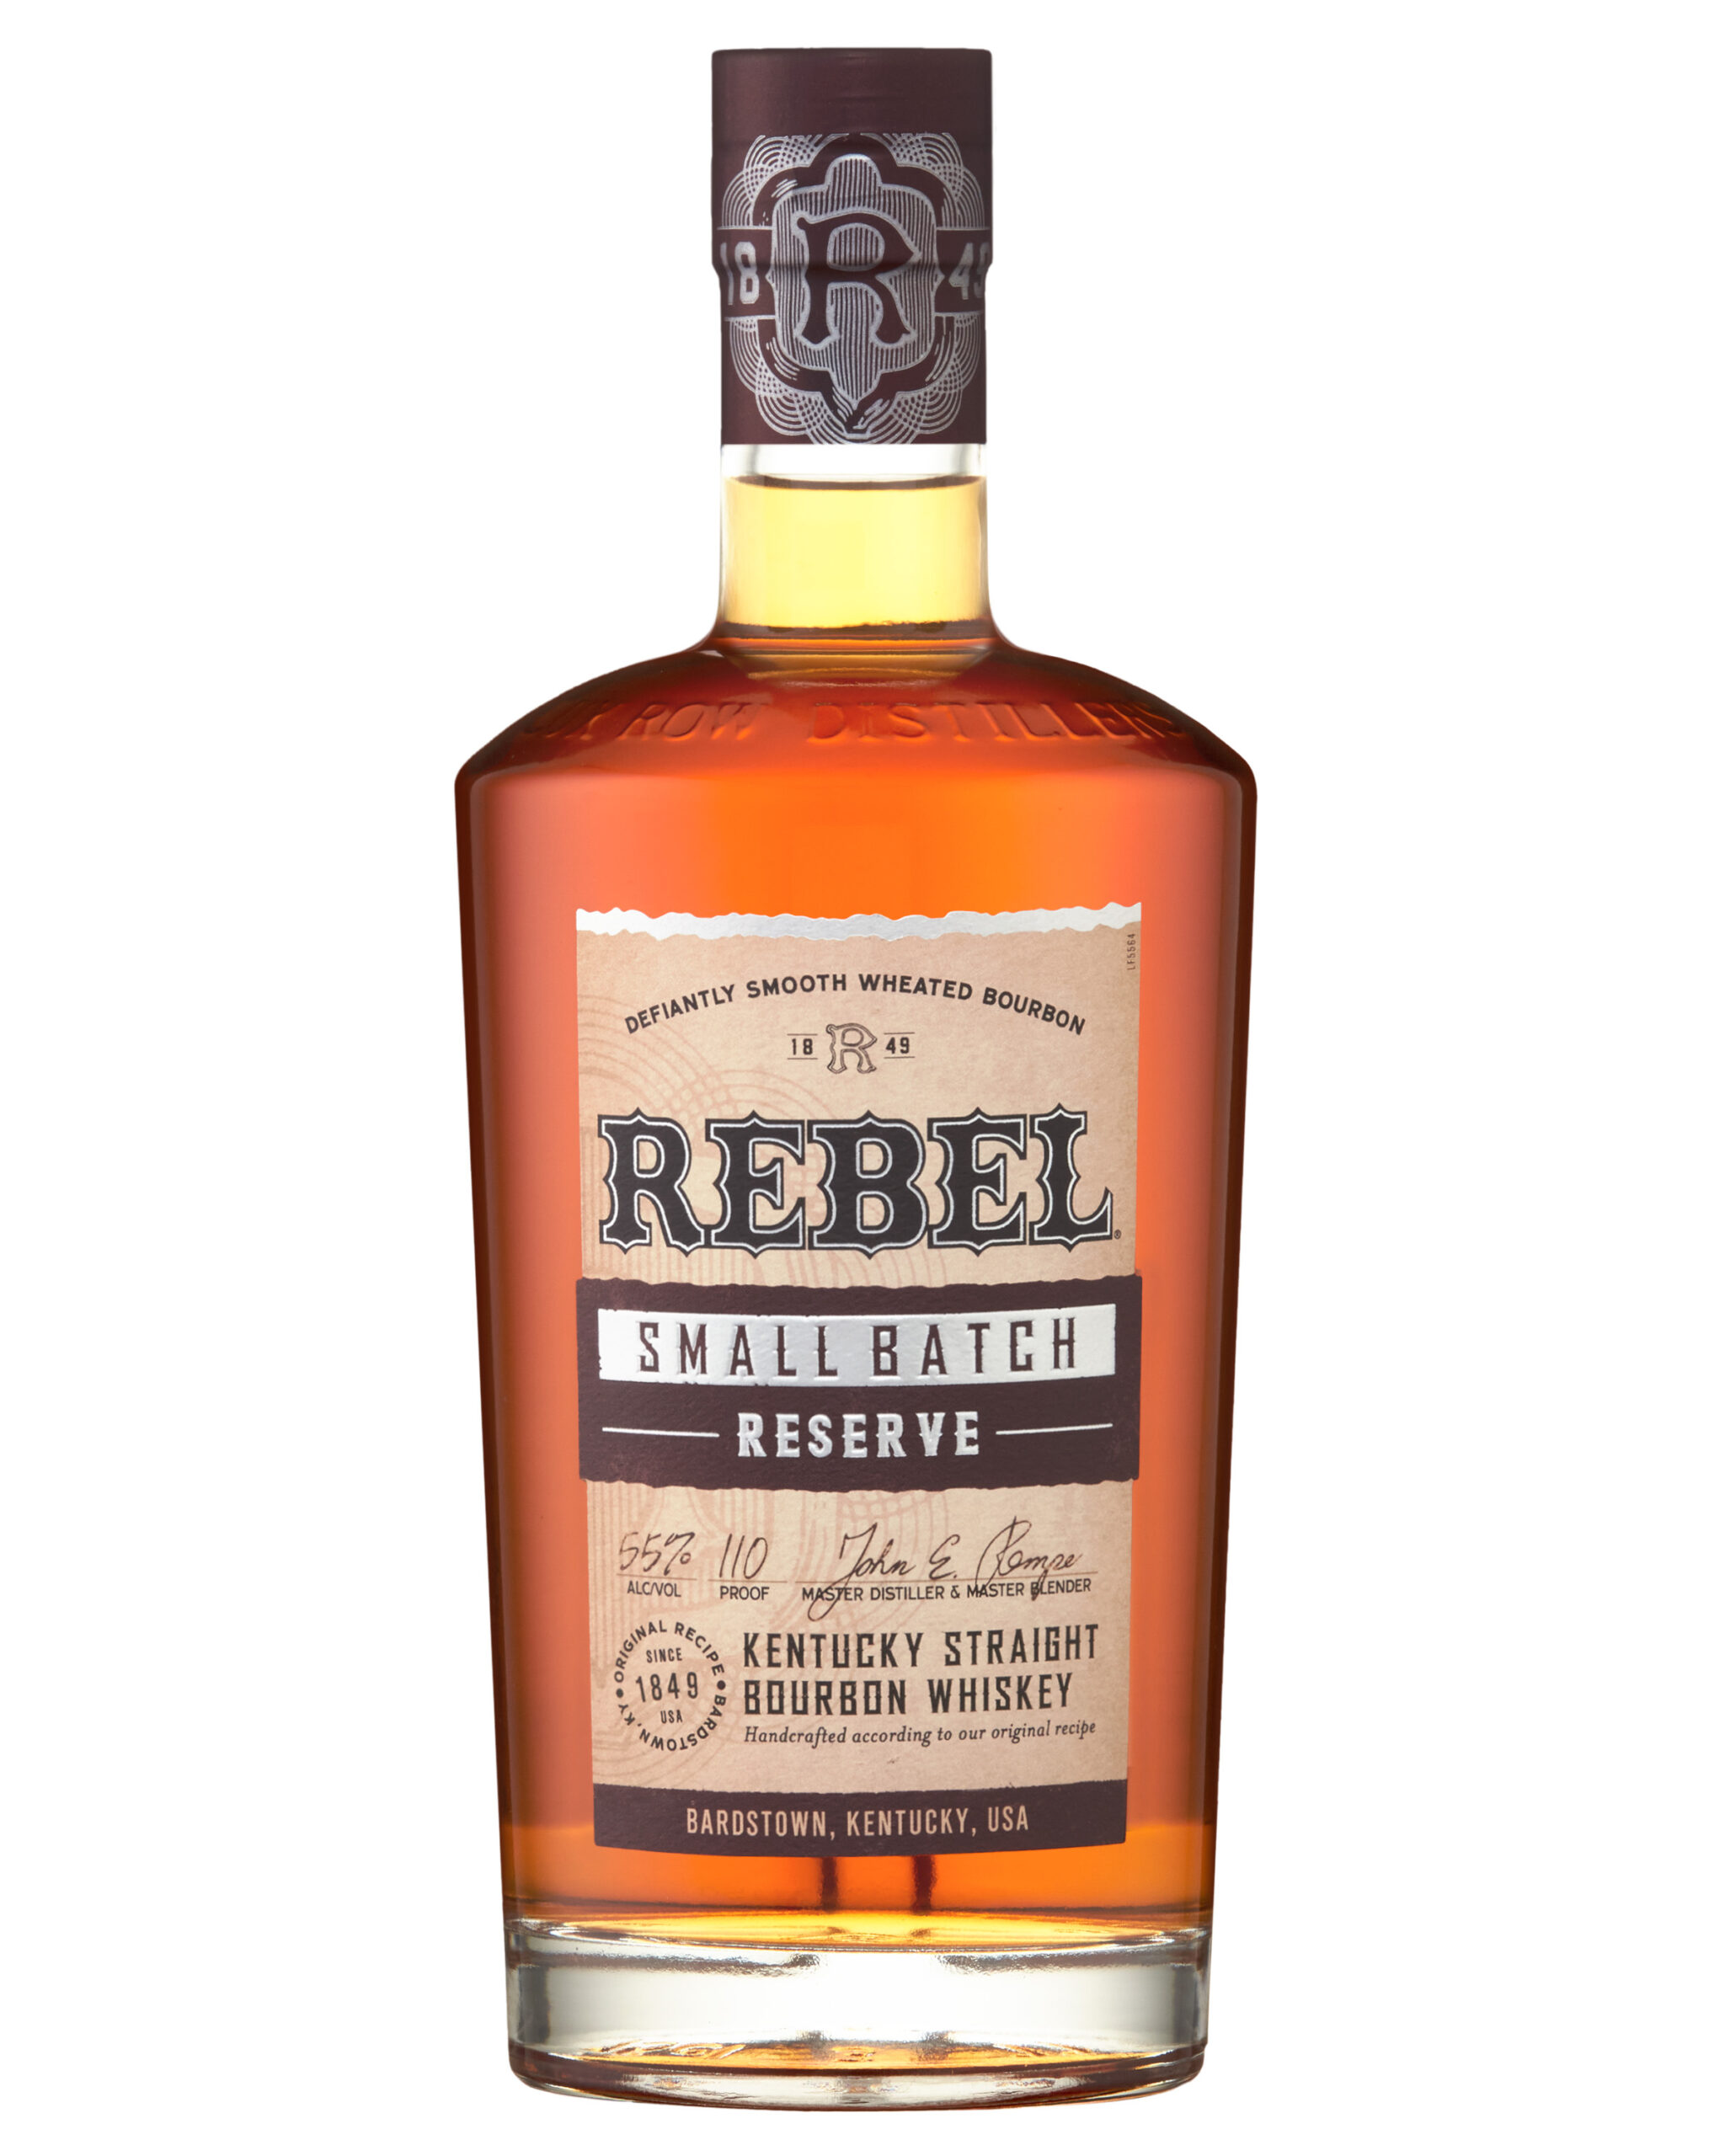 Lux Row Distillers Announce New Rebel Small Batch Reserve Bourbon